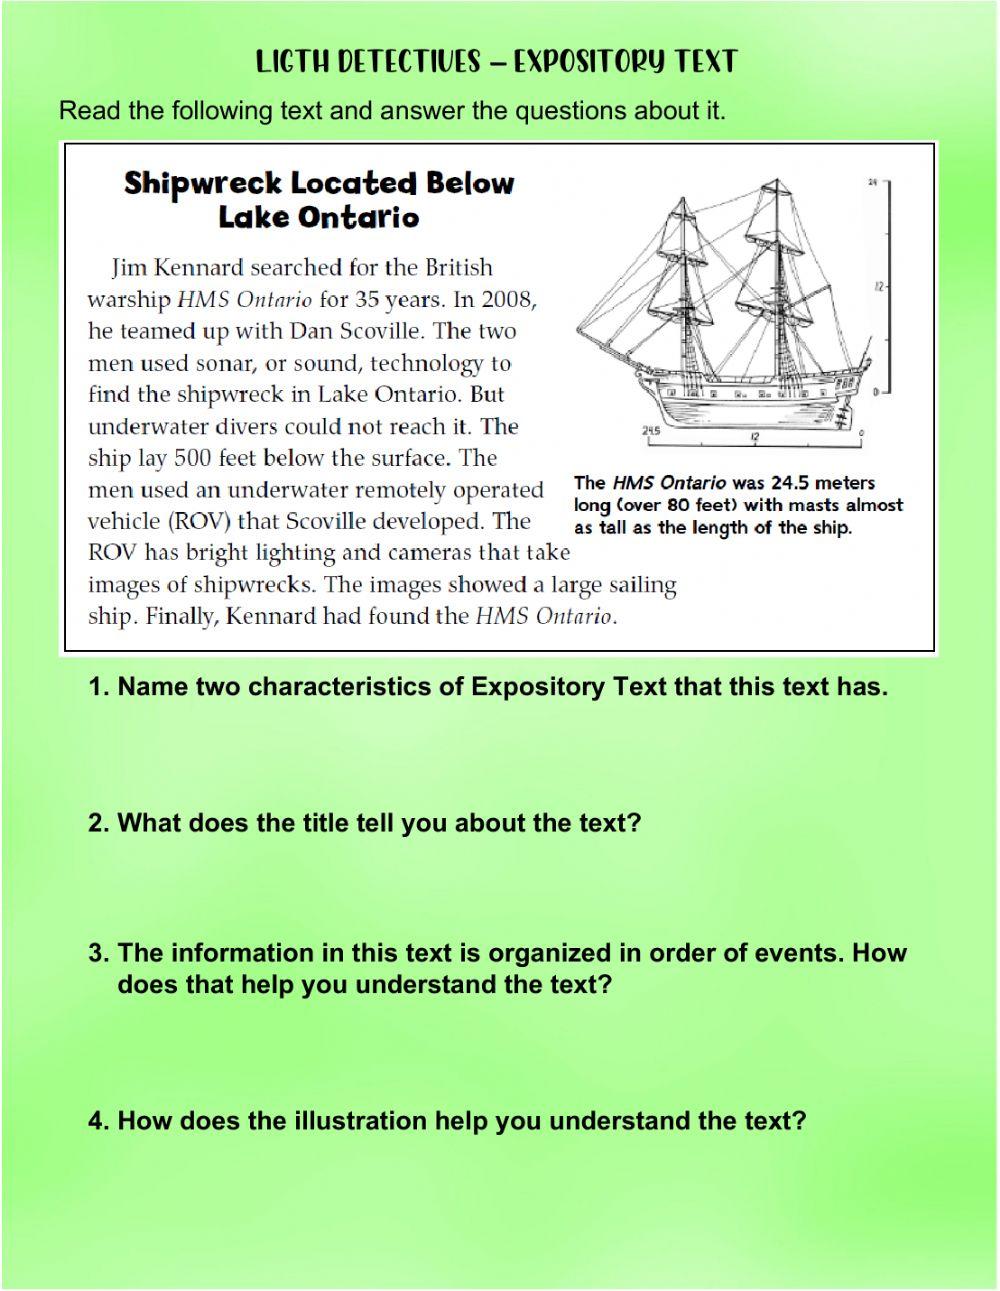 Expository Text Light Detectives